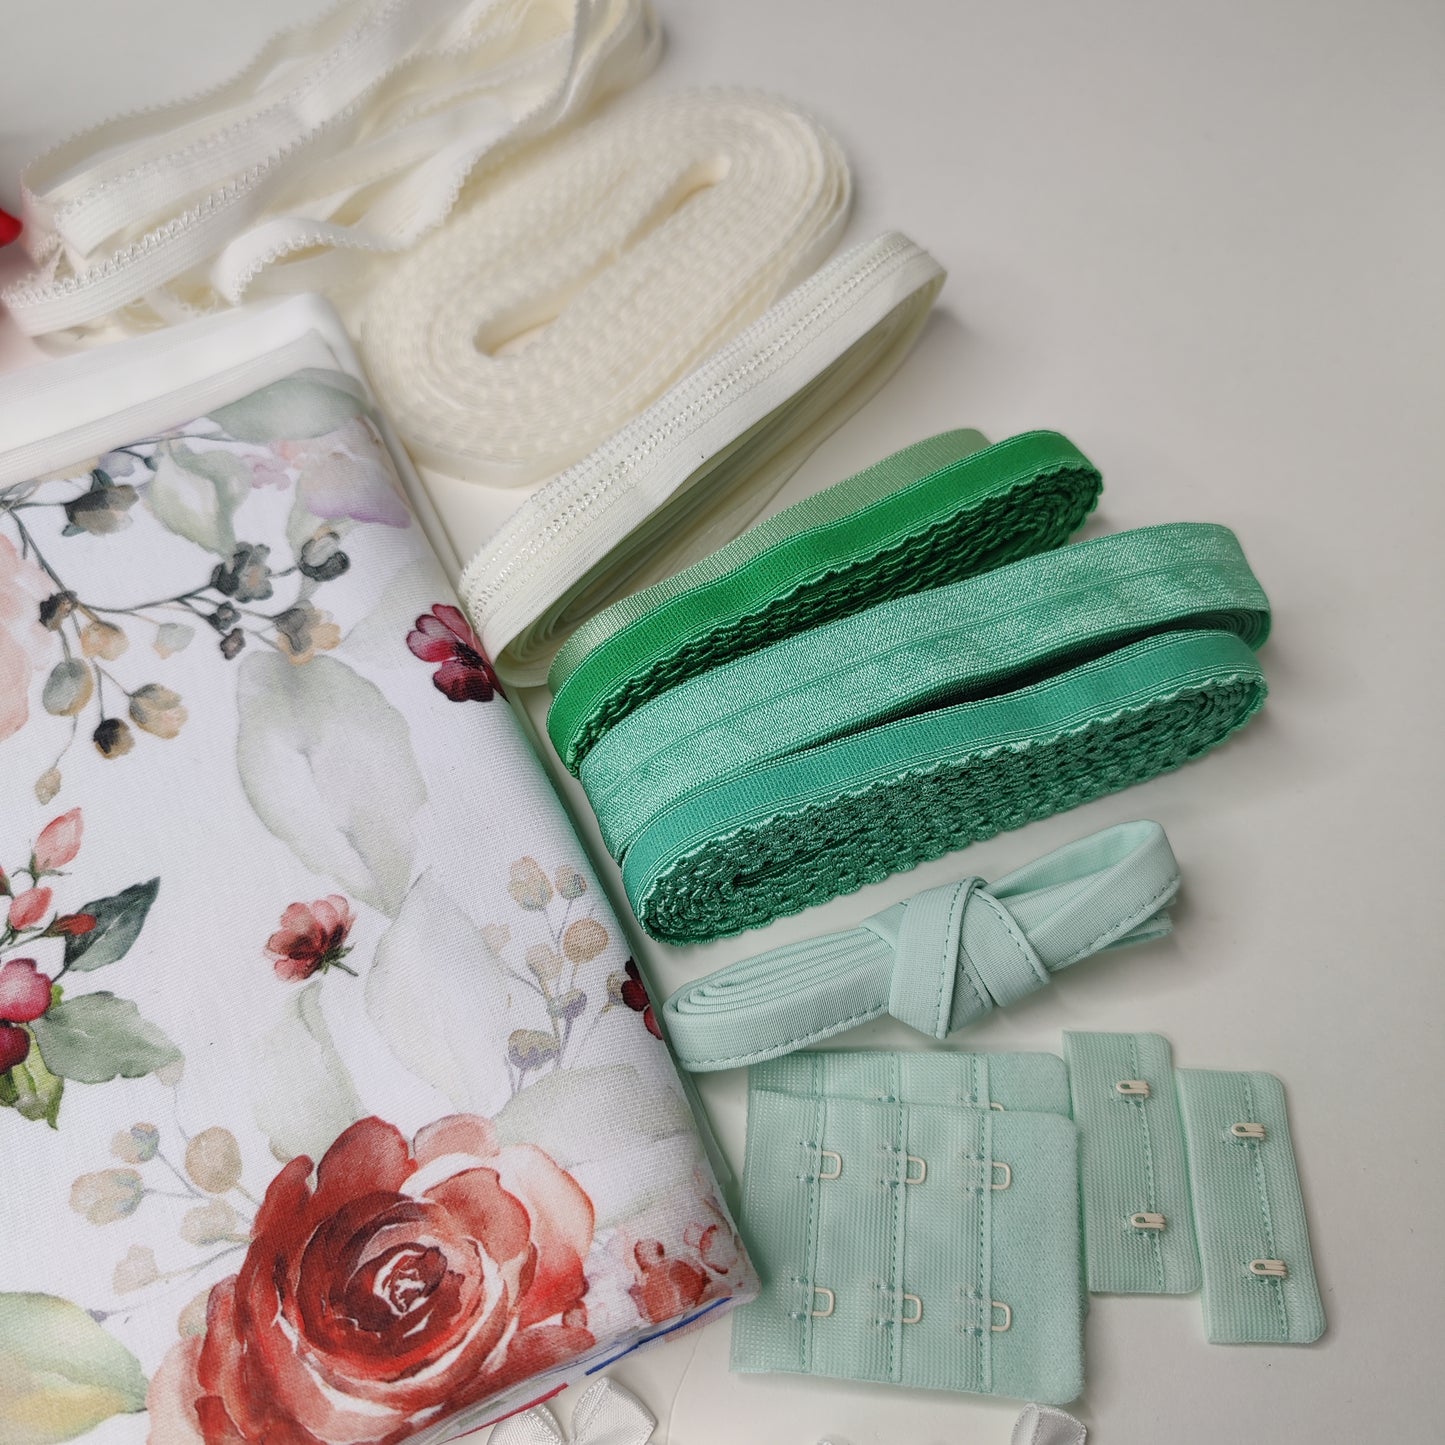 Offer of the month for May. 15% discount will be charged upon checkout. Large sewing set for 2x bras and panties or sewing package with <tc>lace</tc>, microfiber and powernet in green with flowers. IDnsx1